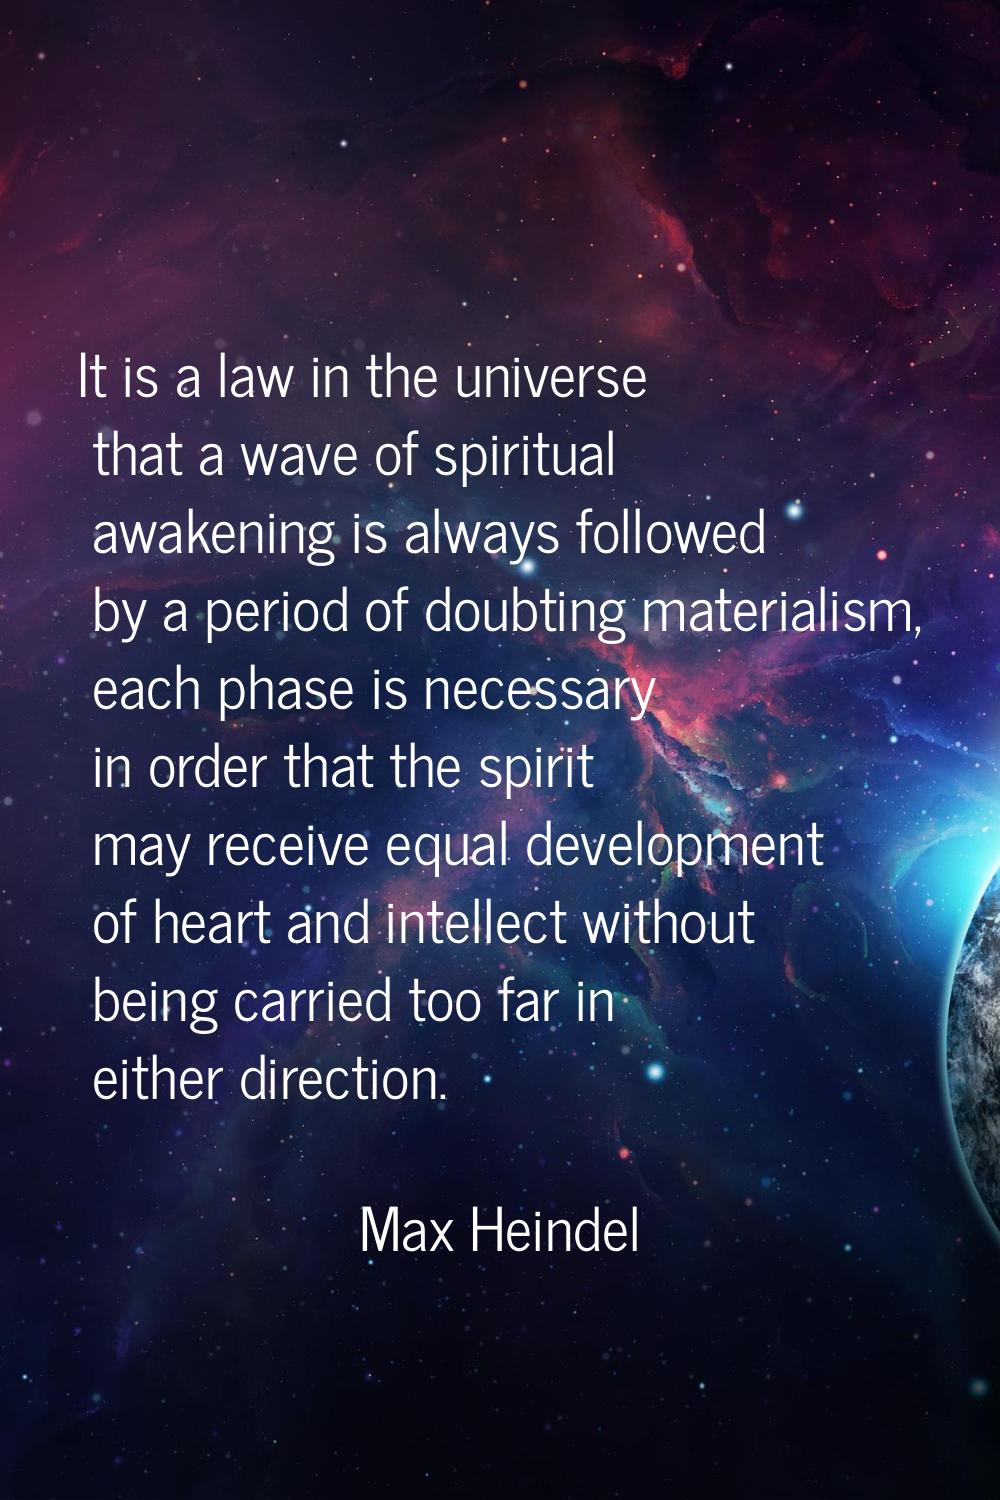 It is a law in the universe that a wave of spiritual awakening is always followed by a period of do